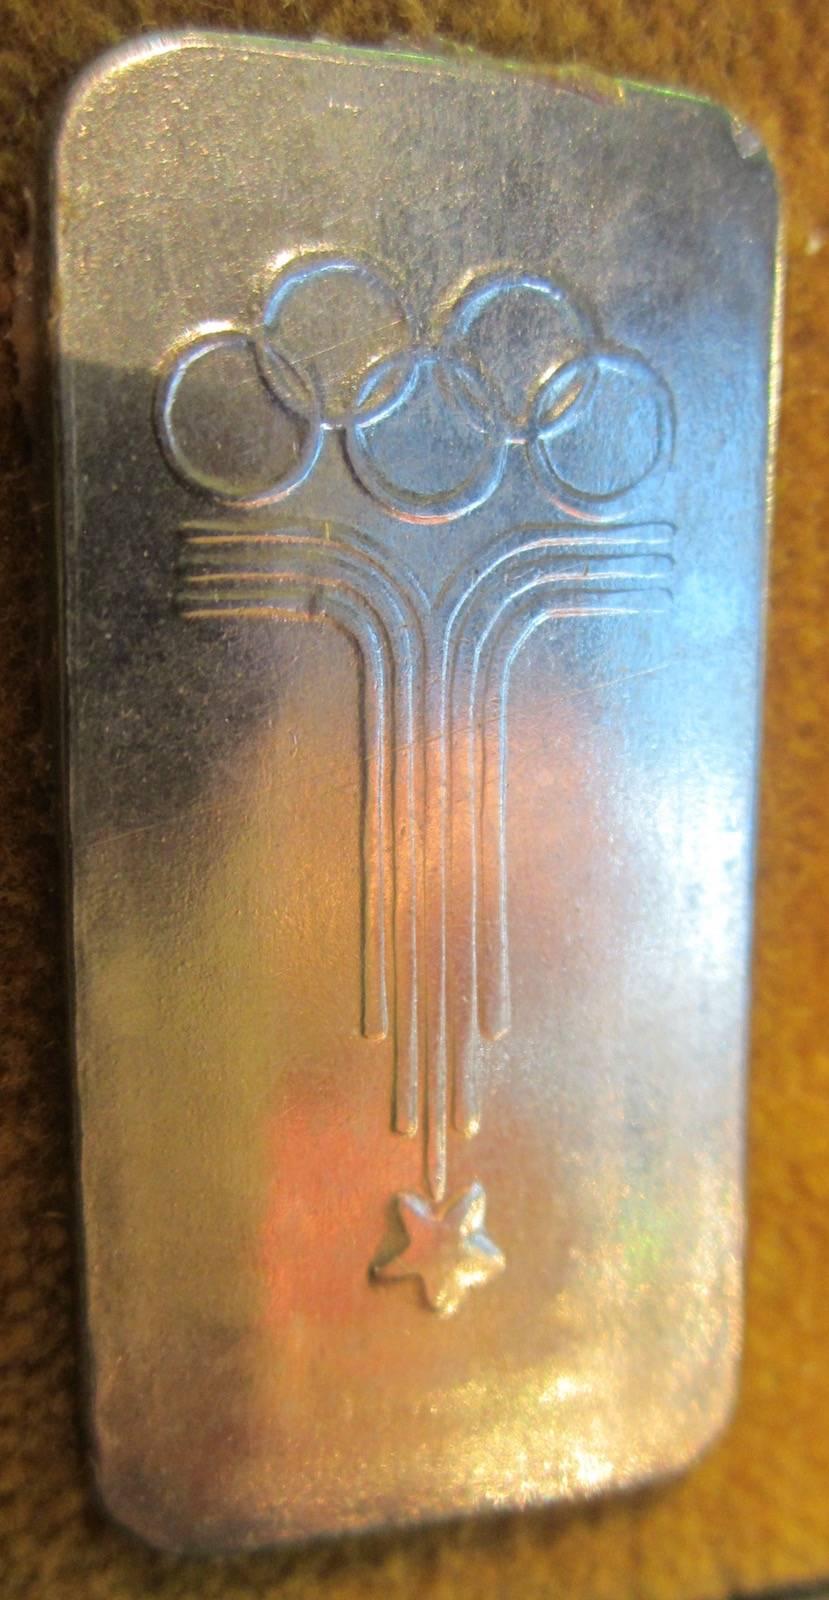 Other 1980 Moscow Olympics Cutlery / Flatware Set